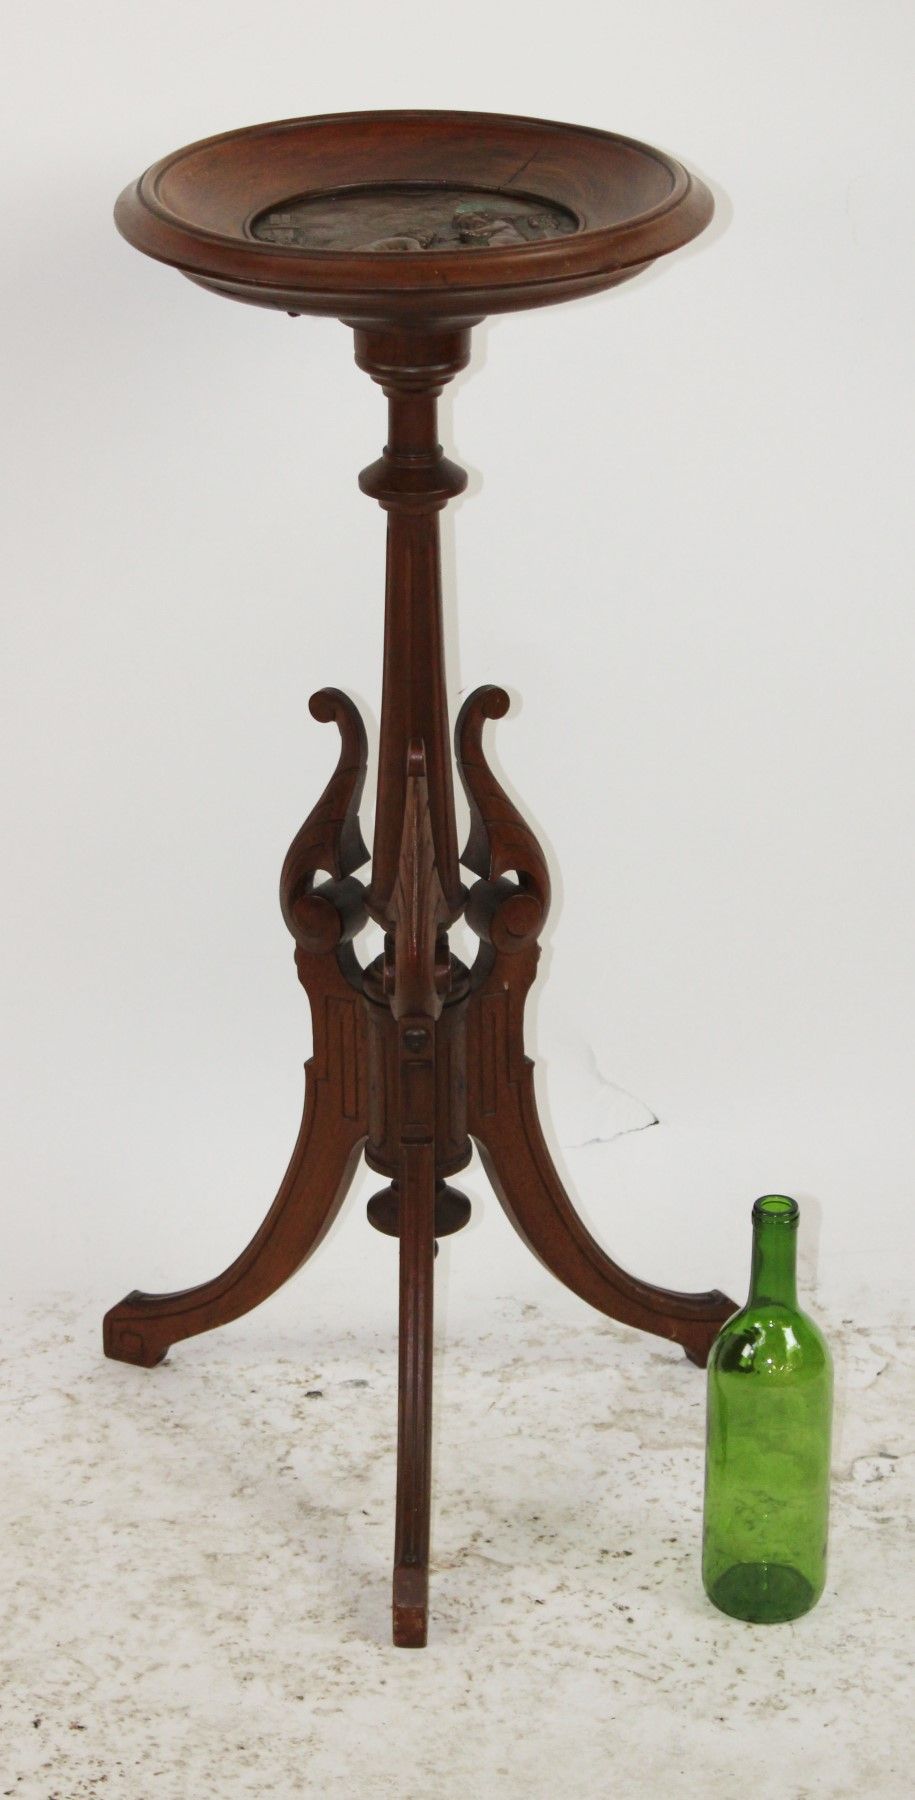 American Aesthetic Movement plant stand with incised carving